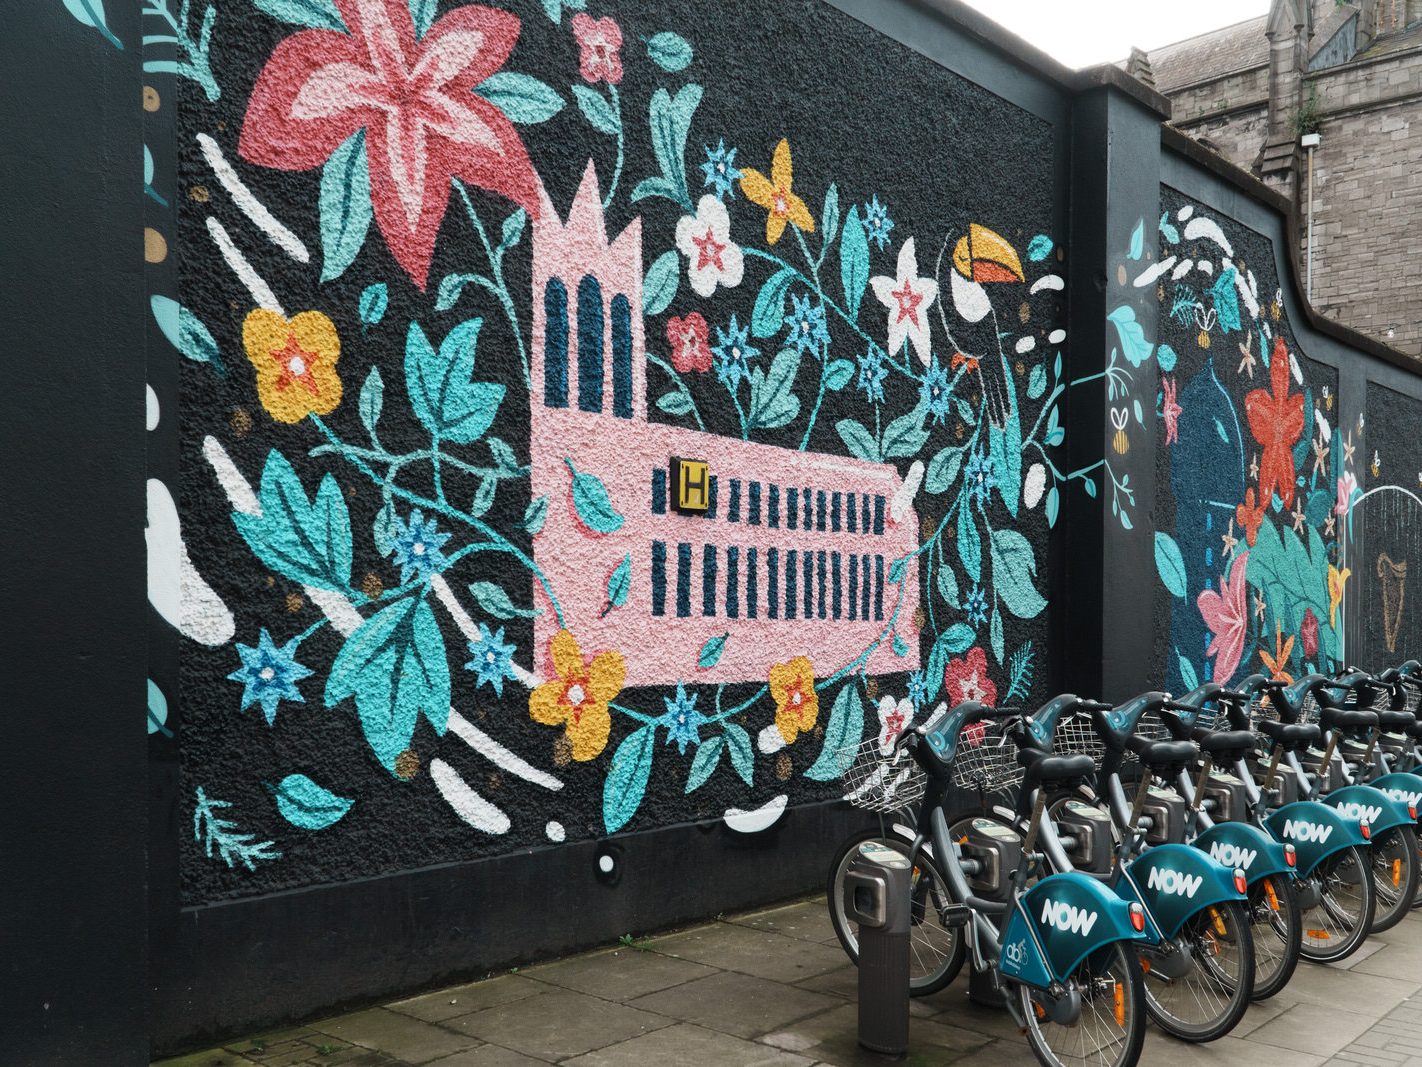 TWO FOR THE PRICE OF ONE [DUBLINBIKES DOCKING STATION 75 AND A MURAL BY HOLLY PEREIRA]-229688-1